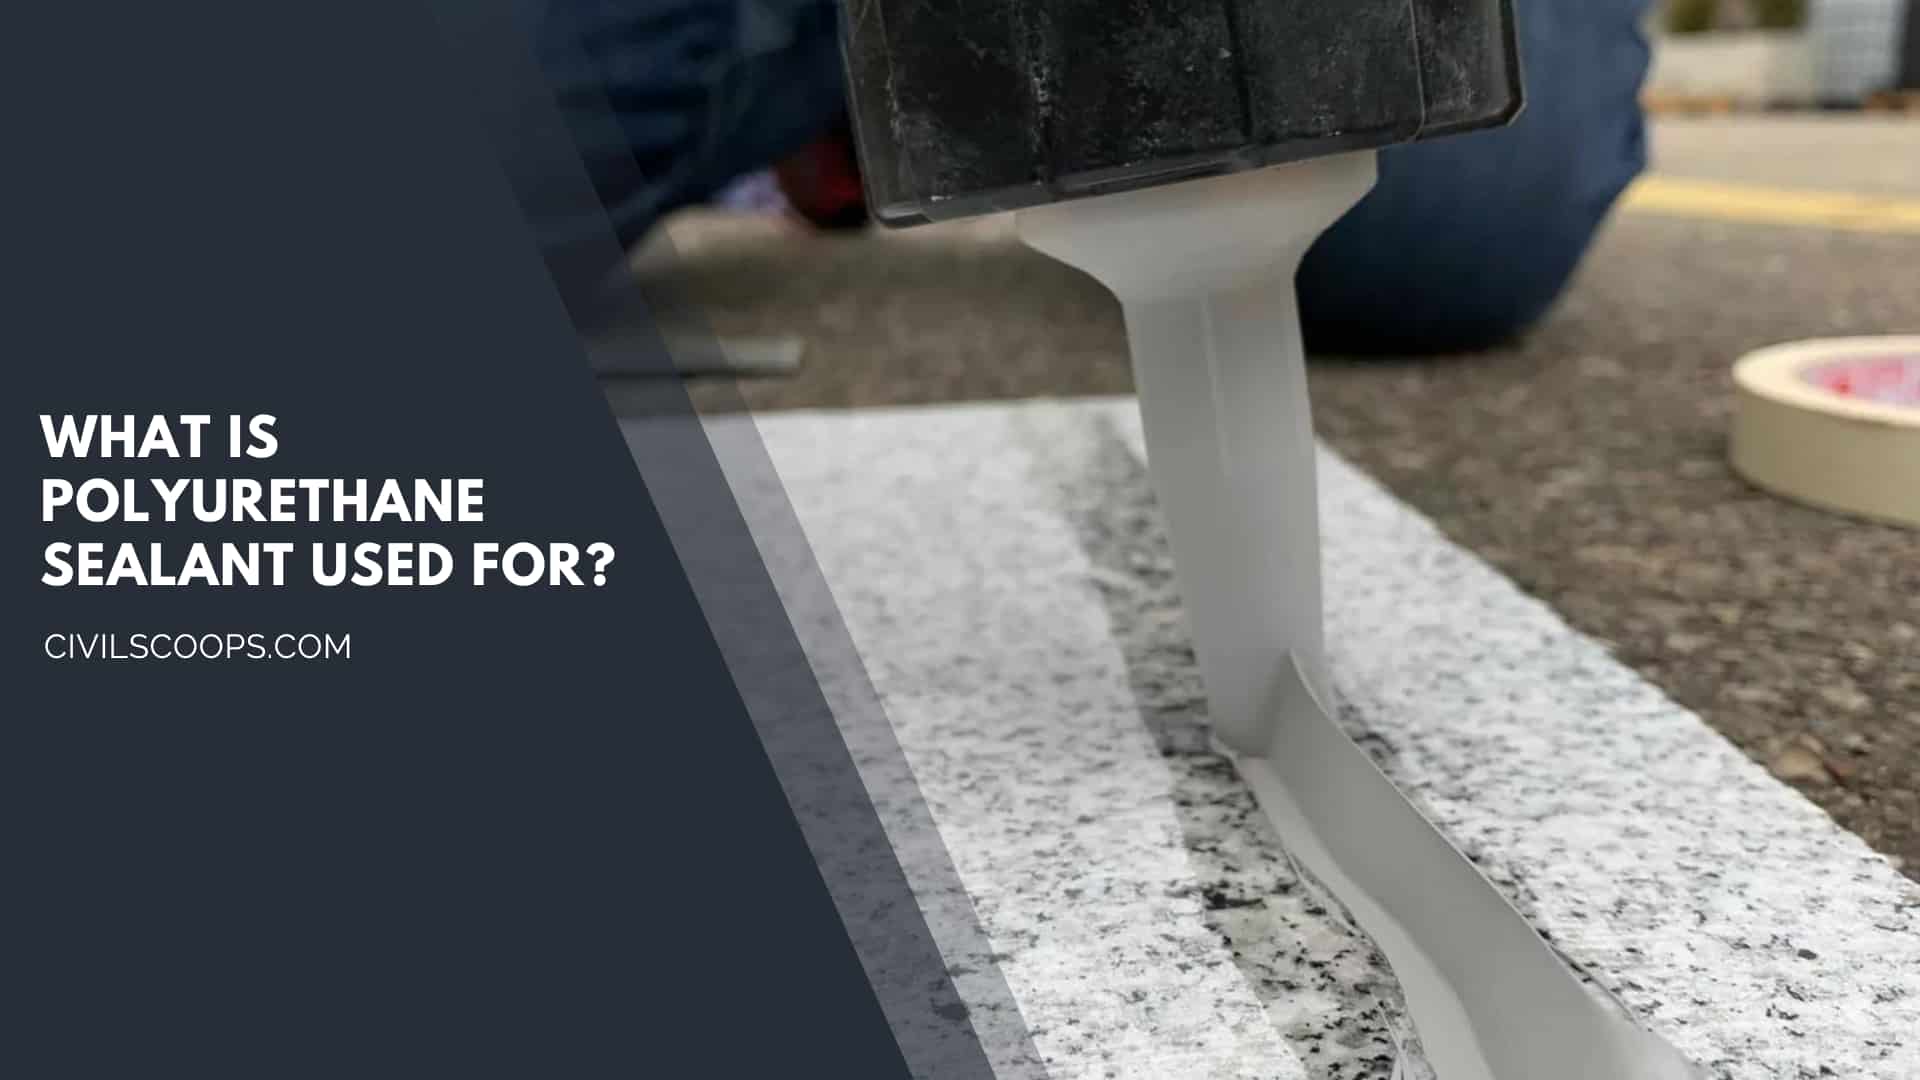 What Is Polyurethane Sealant Used For?